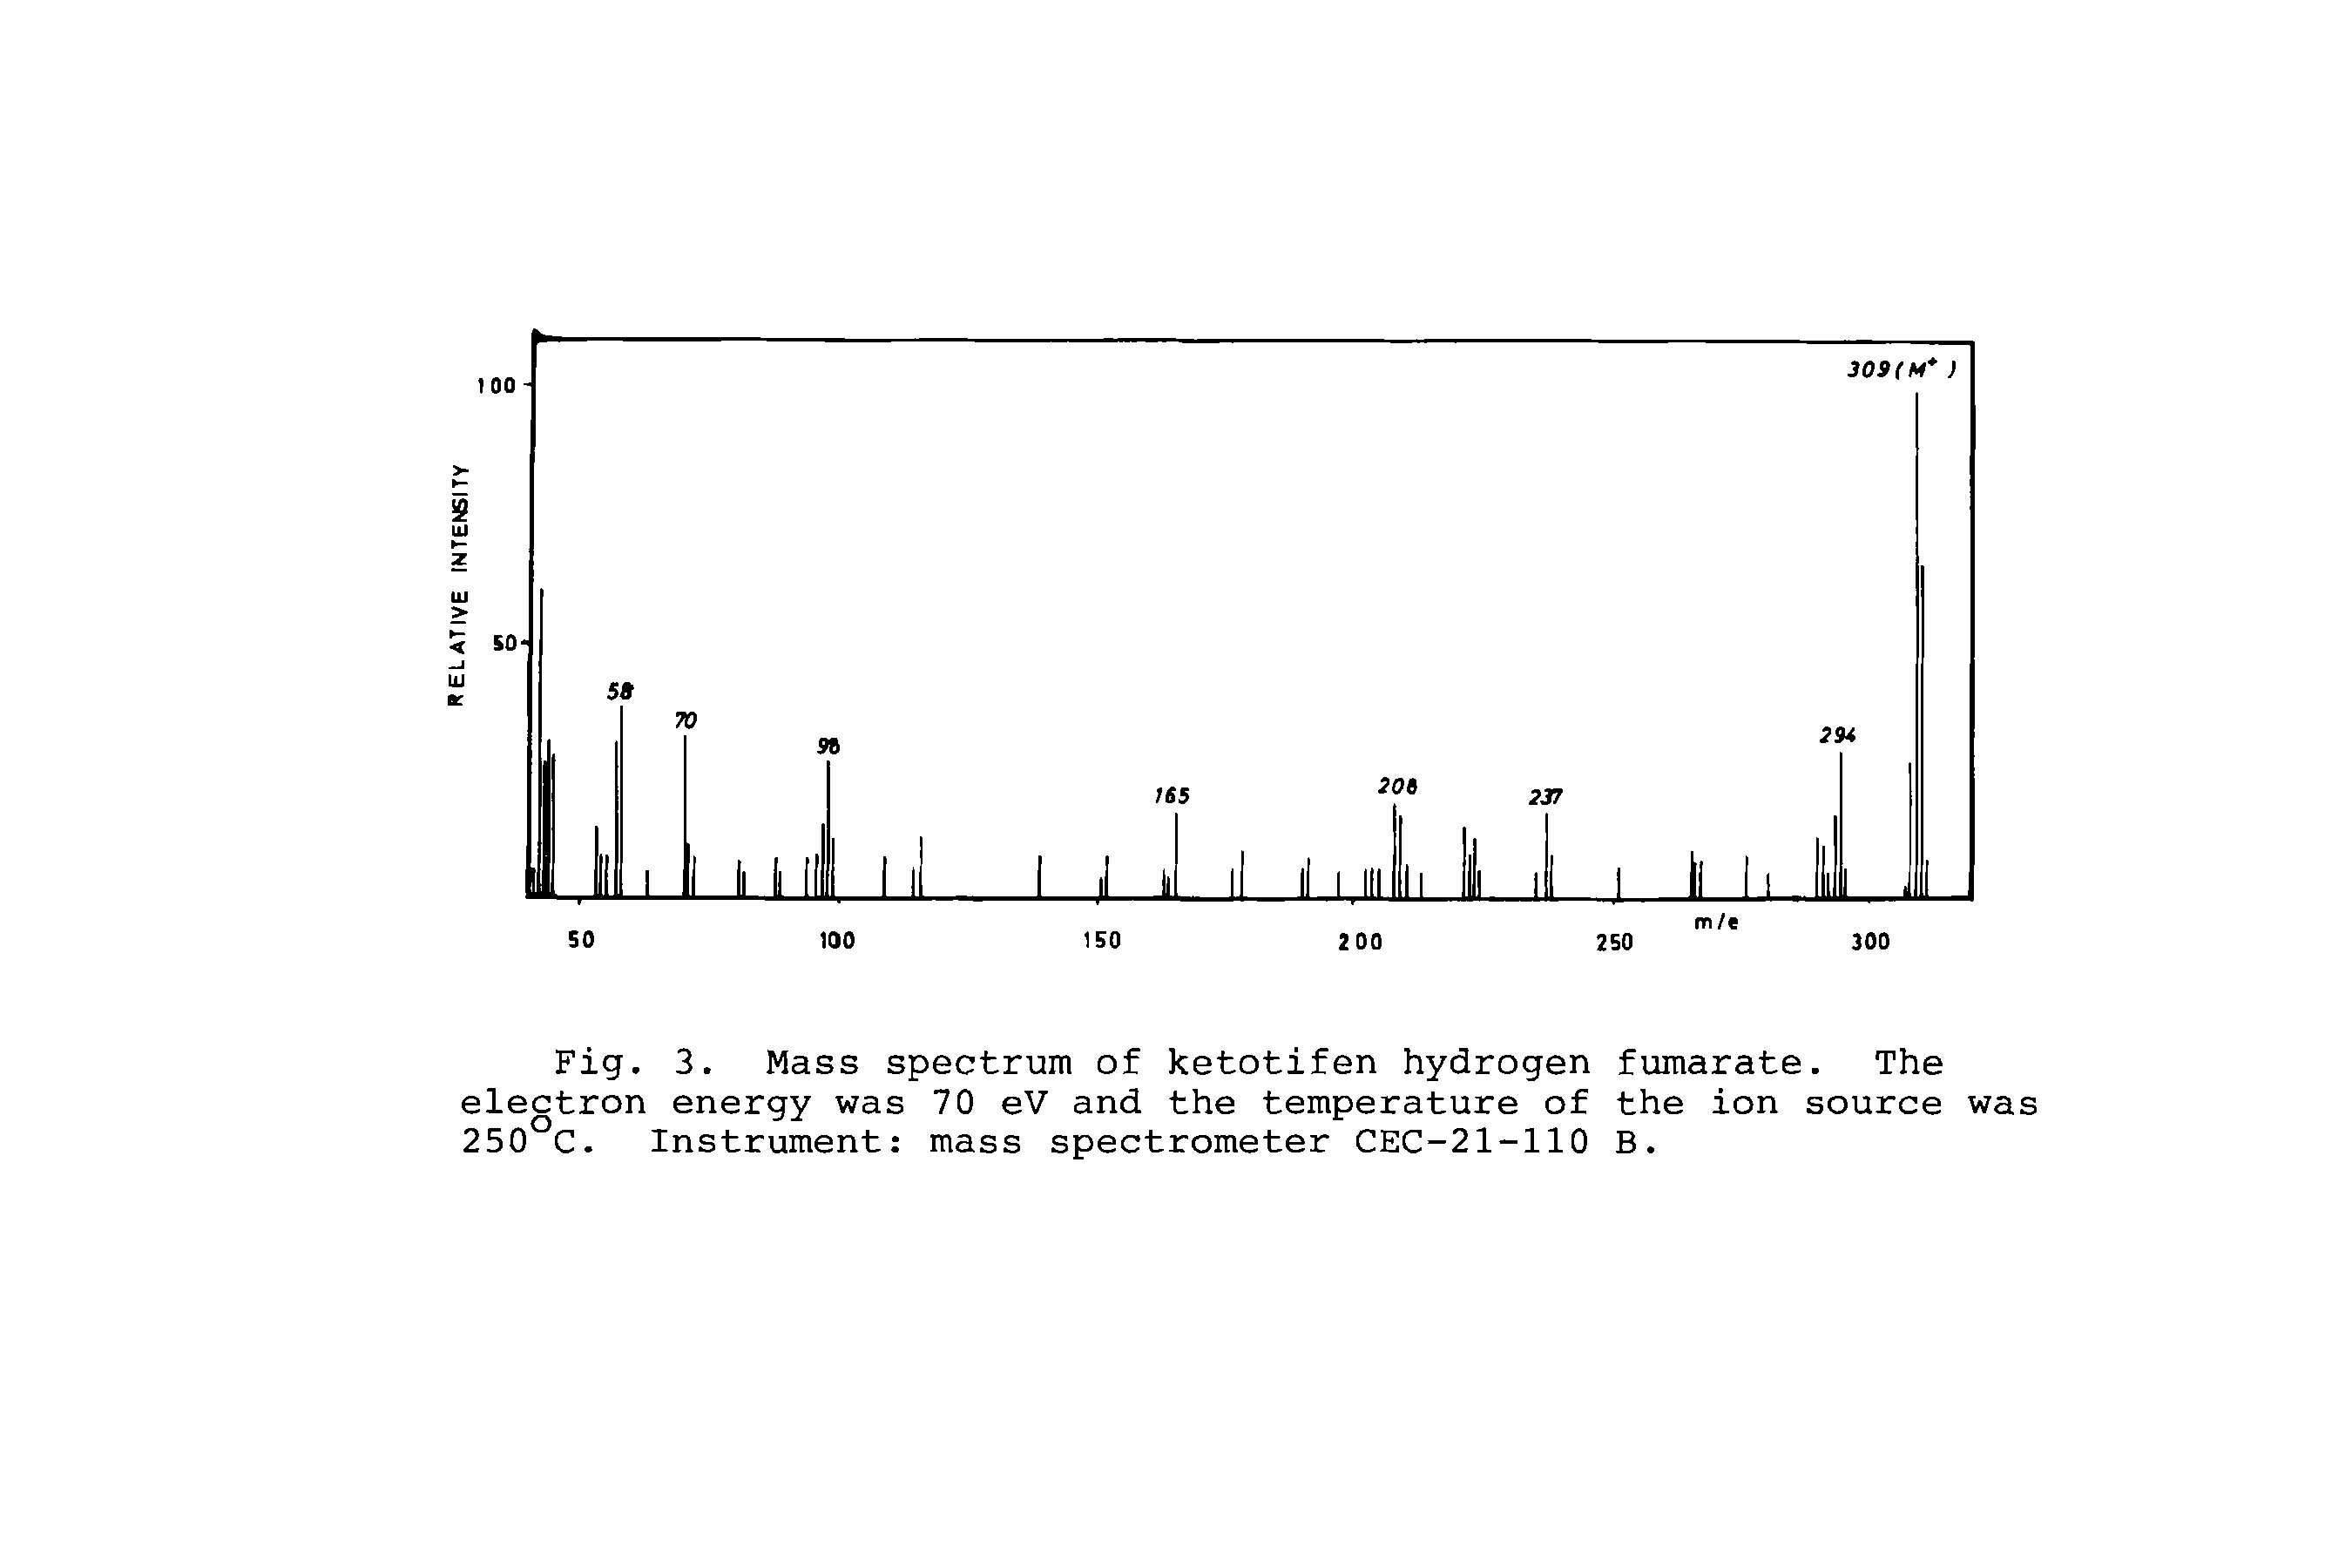 Fig. 3. Mass spectrum of ketotifen hydrogen fumarate. The electron energy was 70 eV and the temperature of the ion source was 250 C. Instrument mass spectrometer CEC-21-110 B.